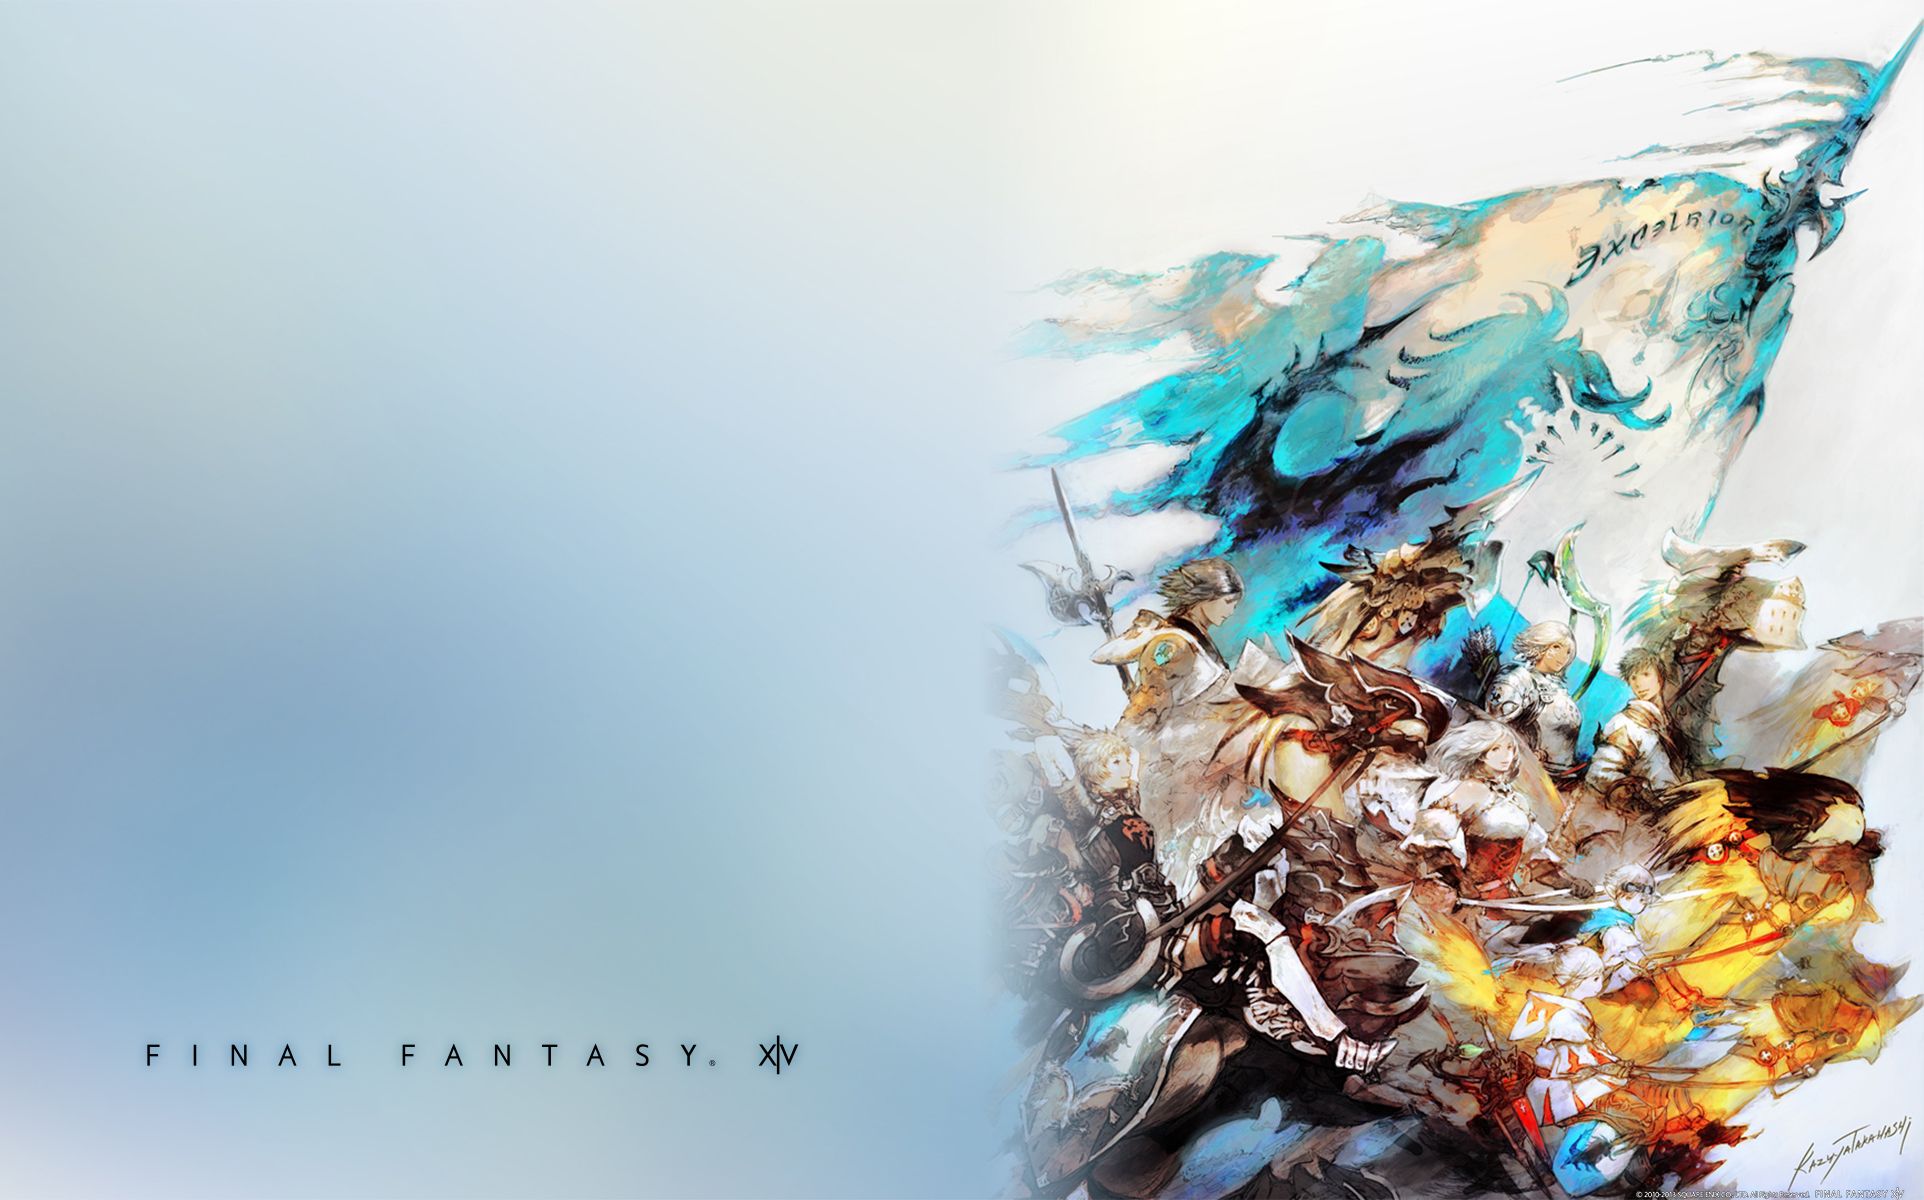 Official Final Fantasy XIV Themes / Wallpapers Released for PC and other